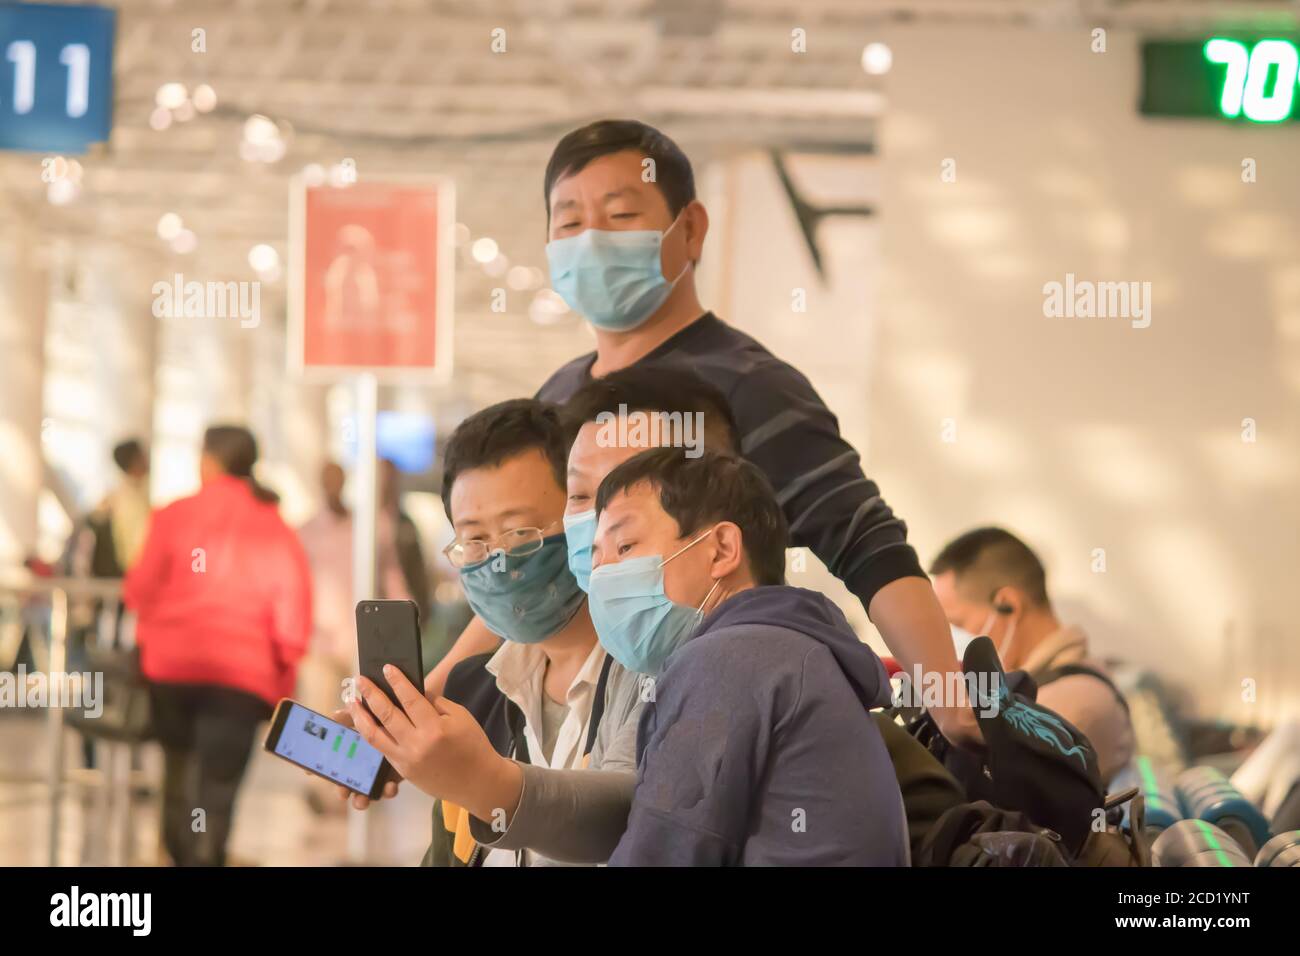 Protective surgical mask, covid 19, corona virus preventive measures persones use at international airport Stock Photo